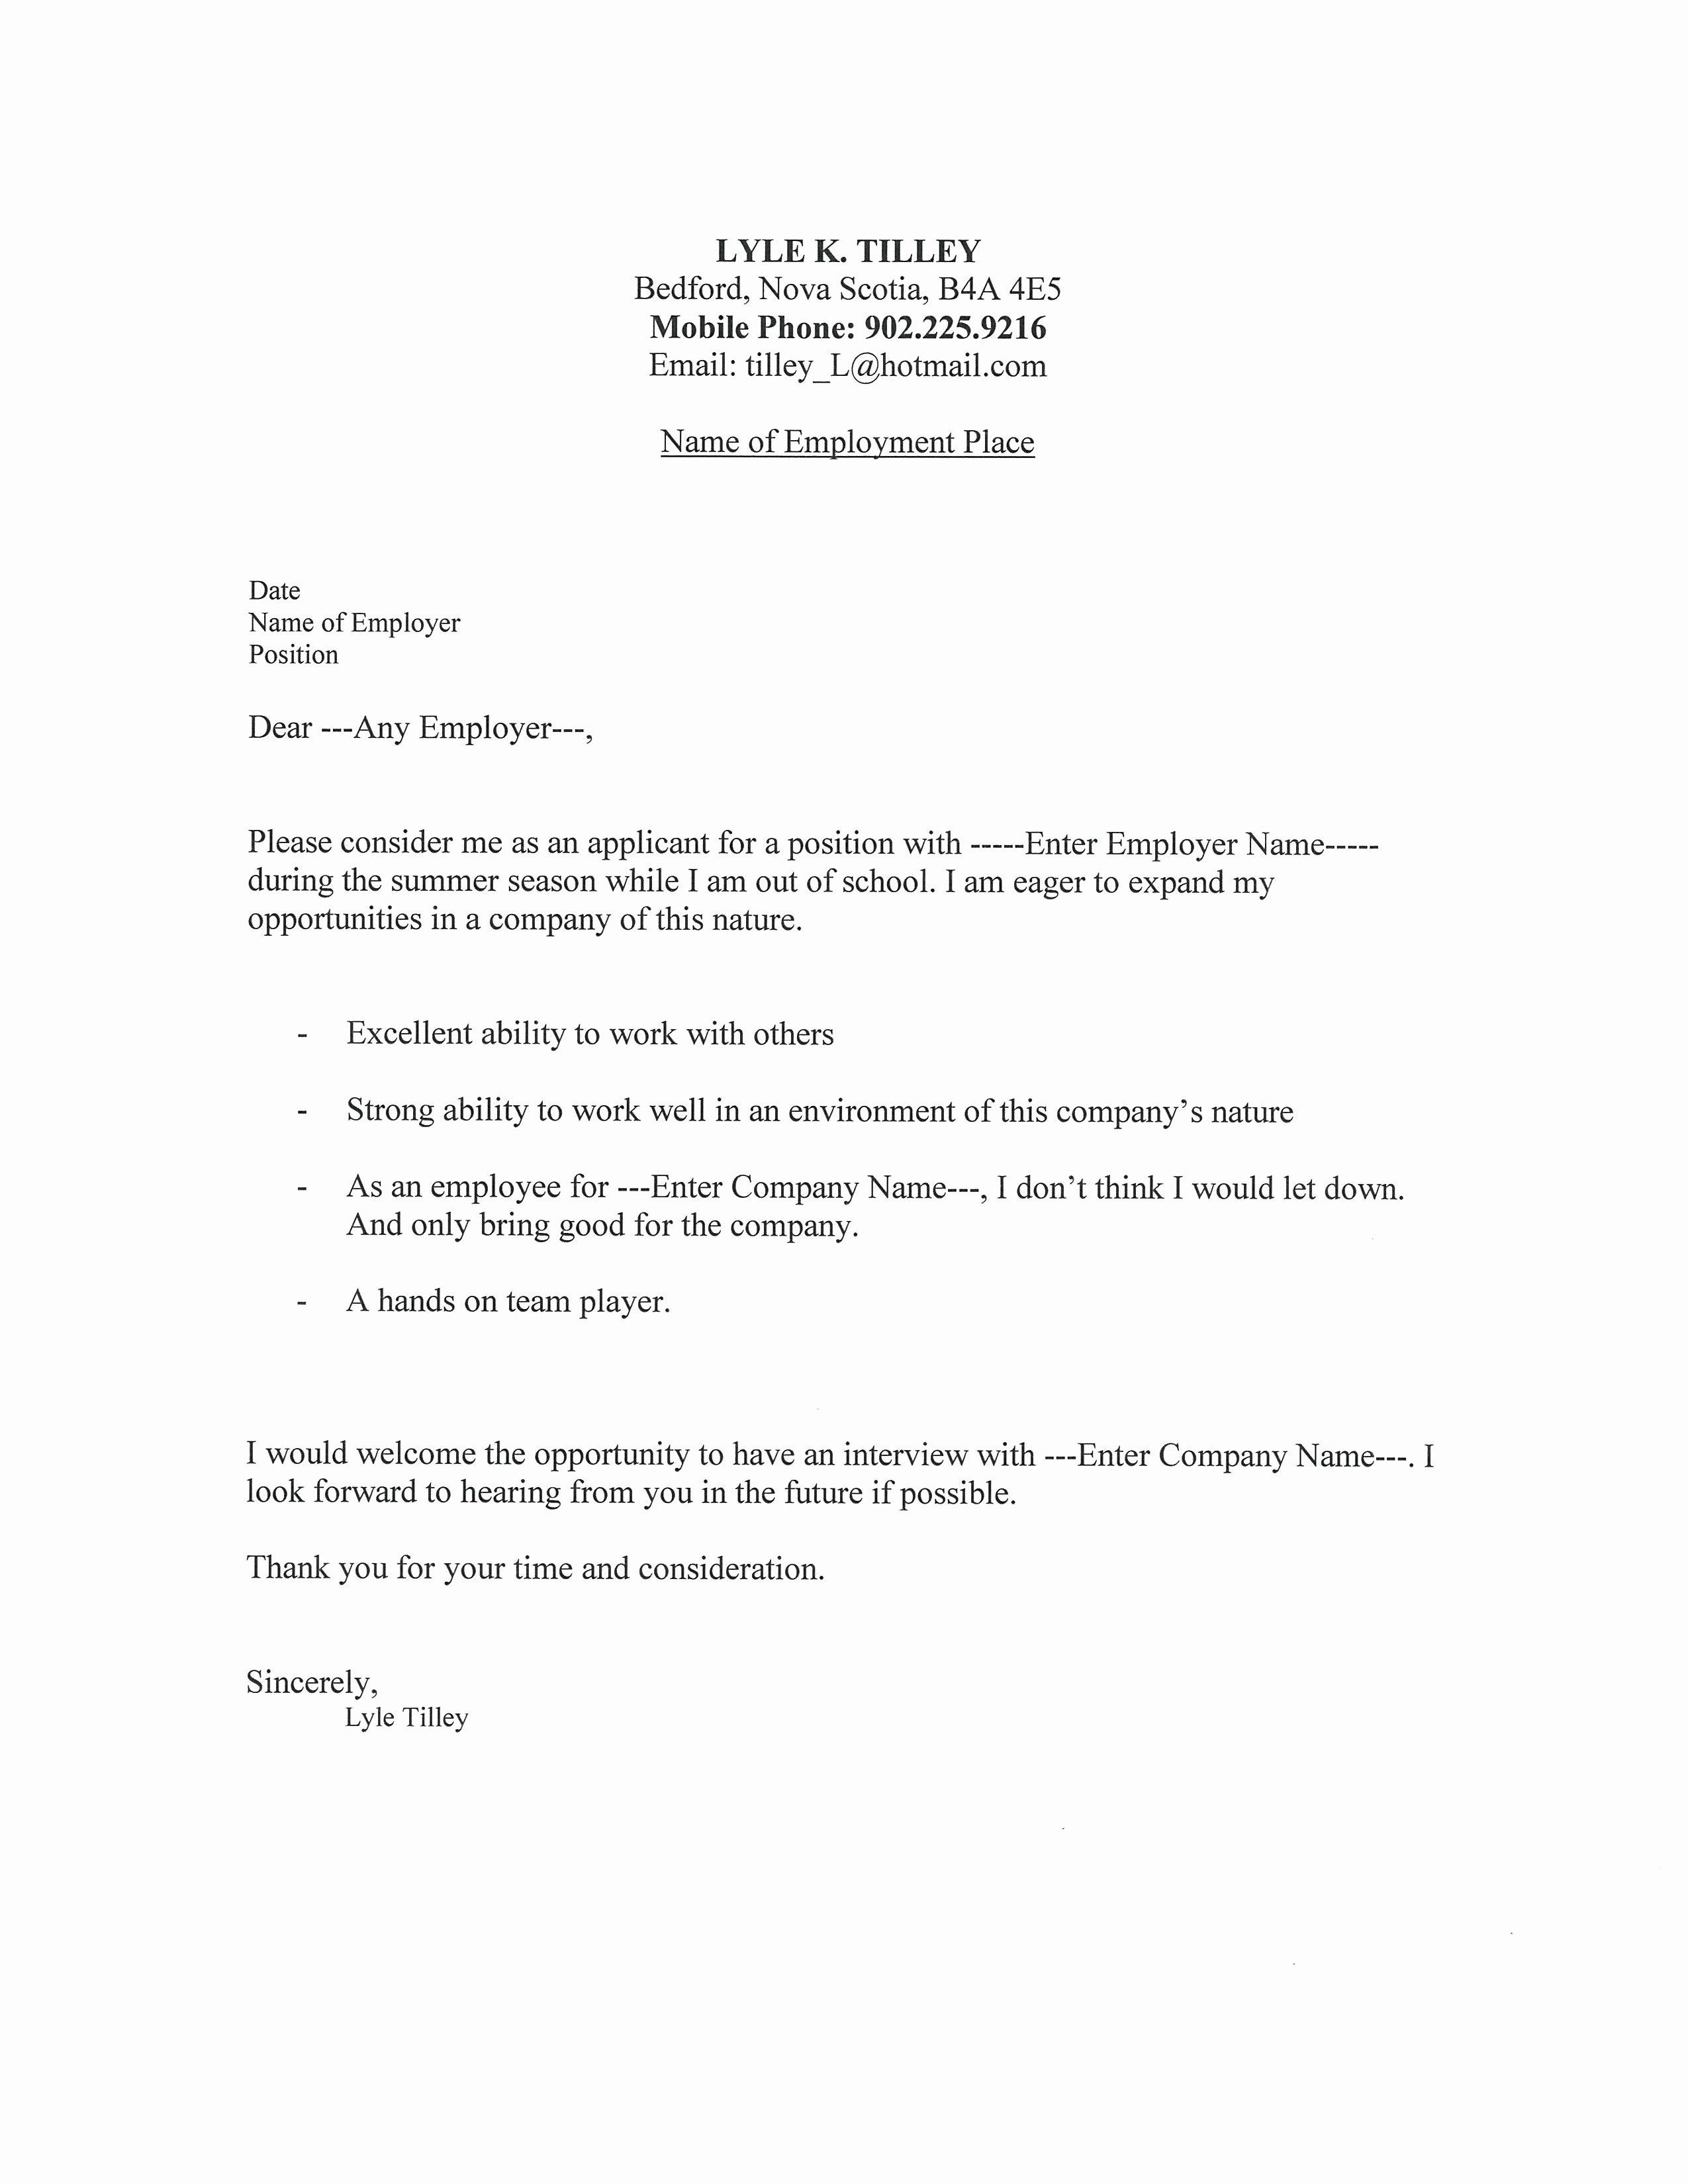 Professional Cover Letters for Resumes Fresh Best Cover Letter for Resume 2016 Samplebusinessresume